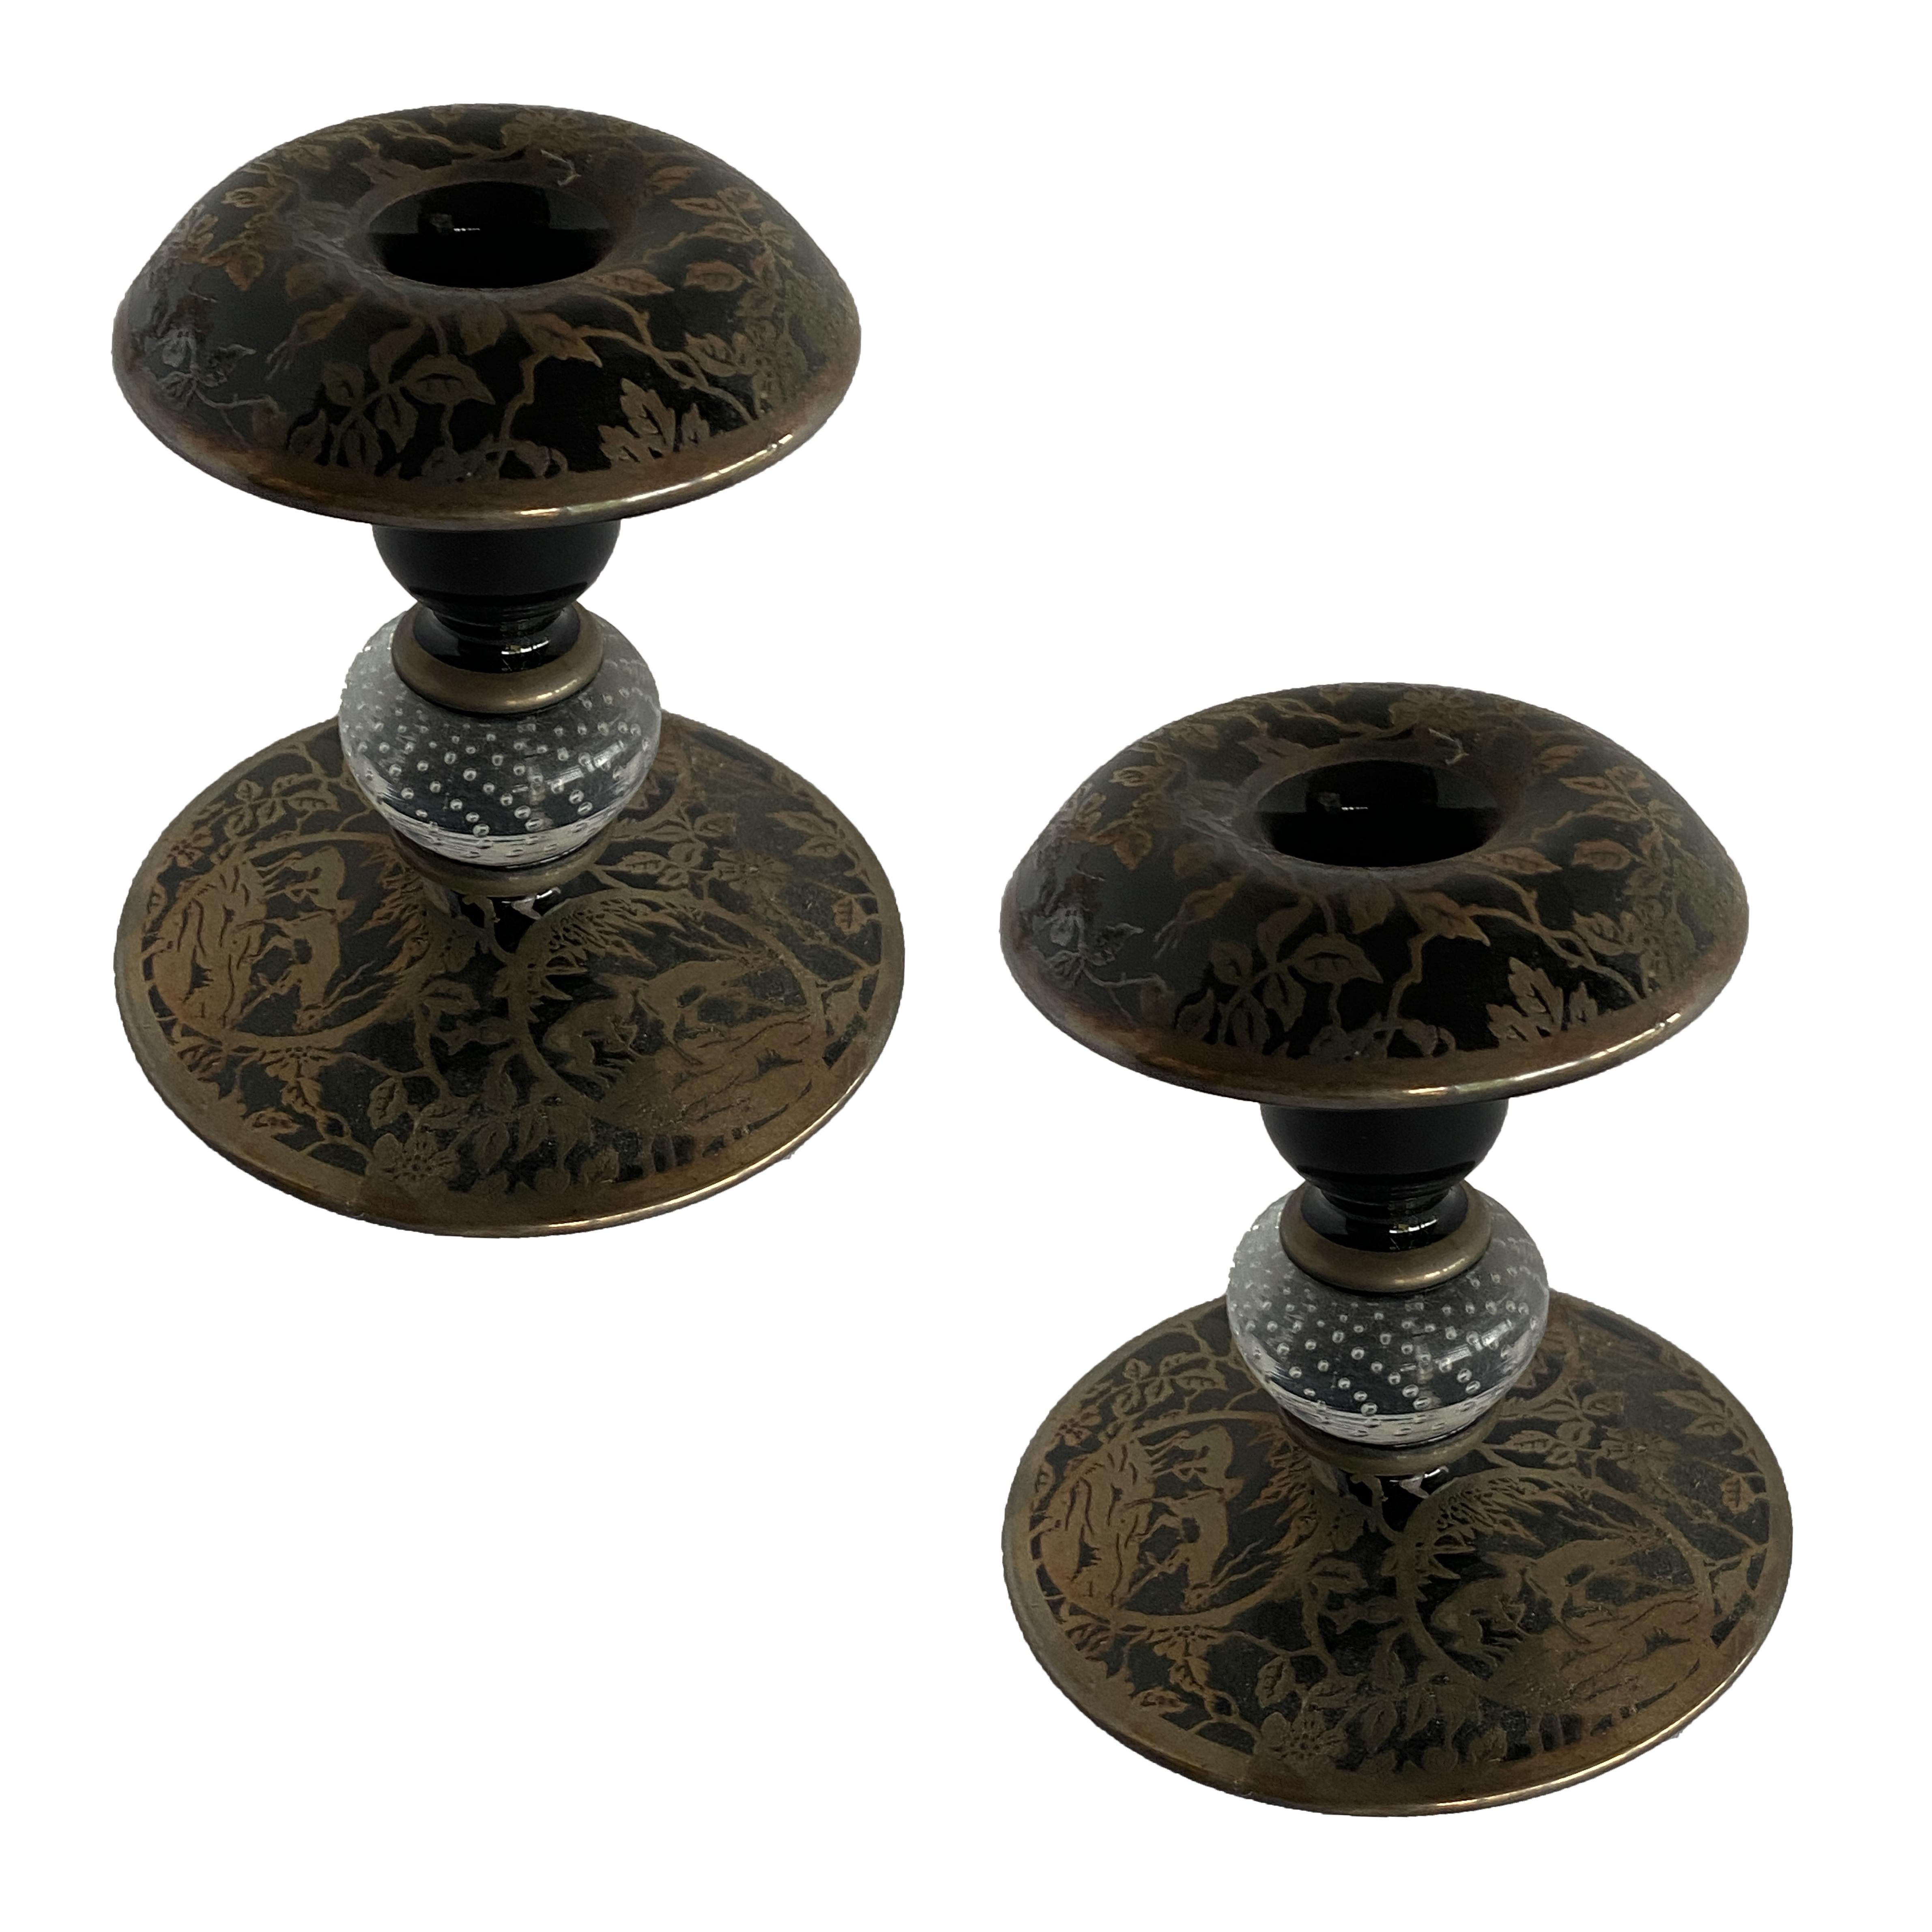 Pair of Victorian-era black amethyst candle holders featuring scrolling silver overlay/inlay leaf pattern.

Circa 1890